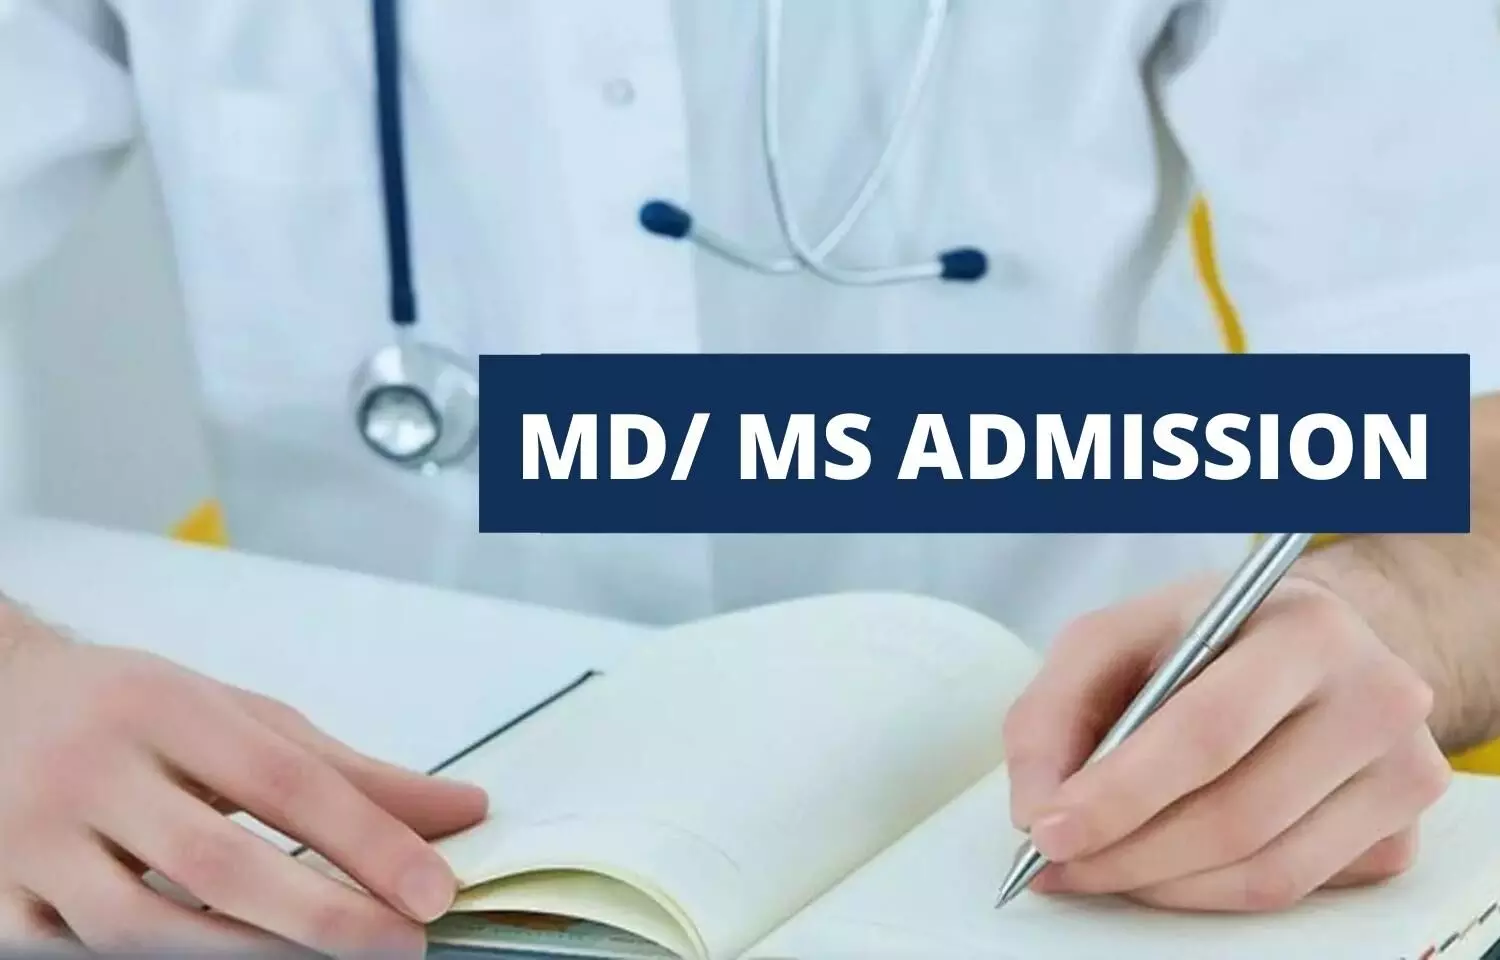 1058 MD, MS seats available at MP Medical Colleges for this year PG medical admissions